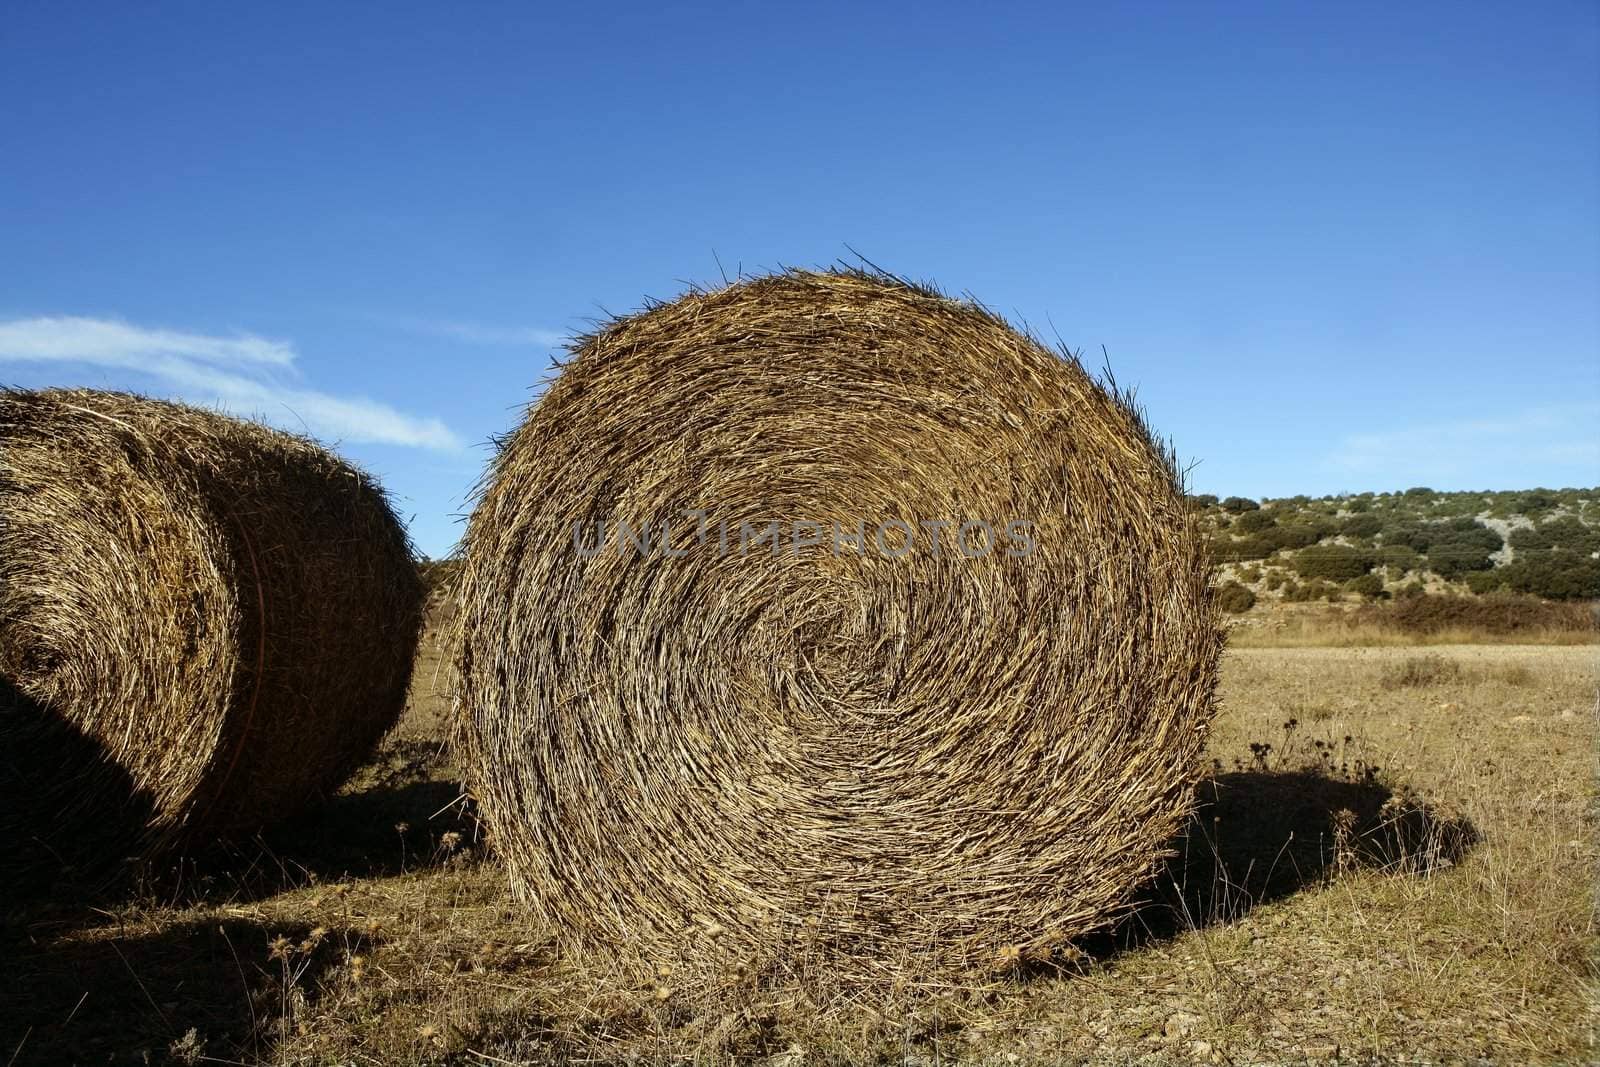 Yellow straw round bale in the fields, blue sky, Spain